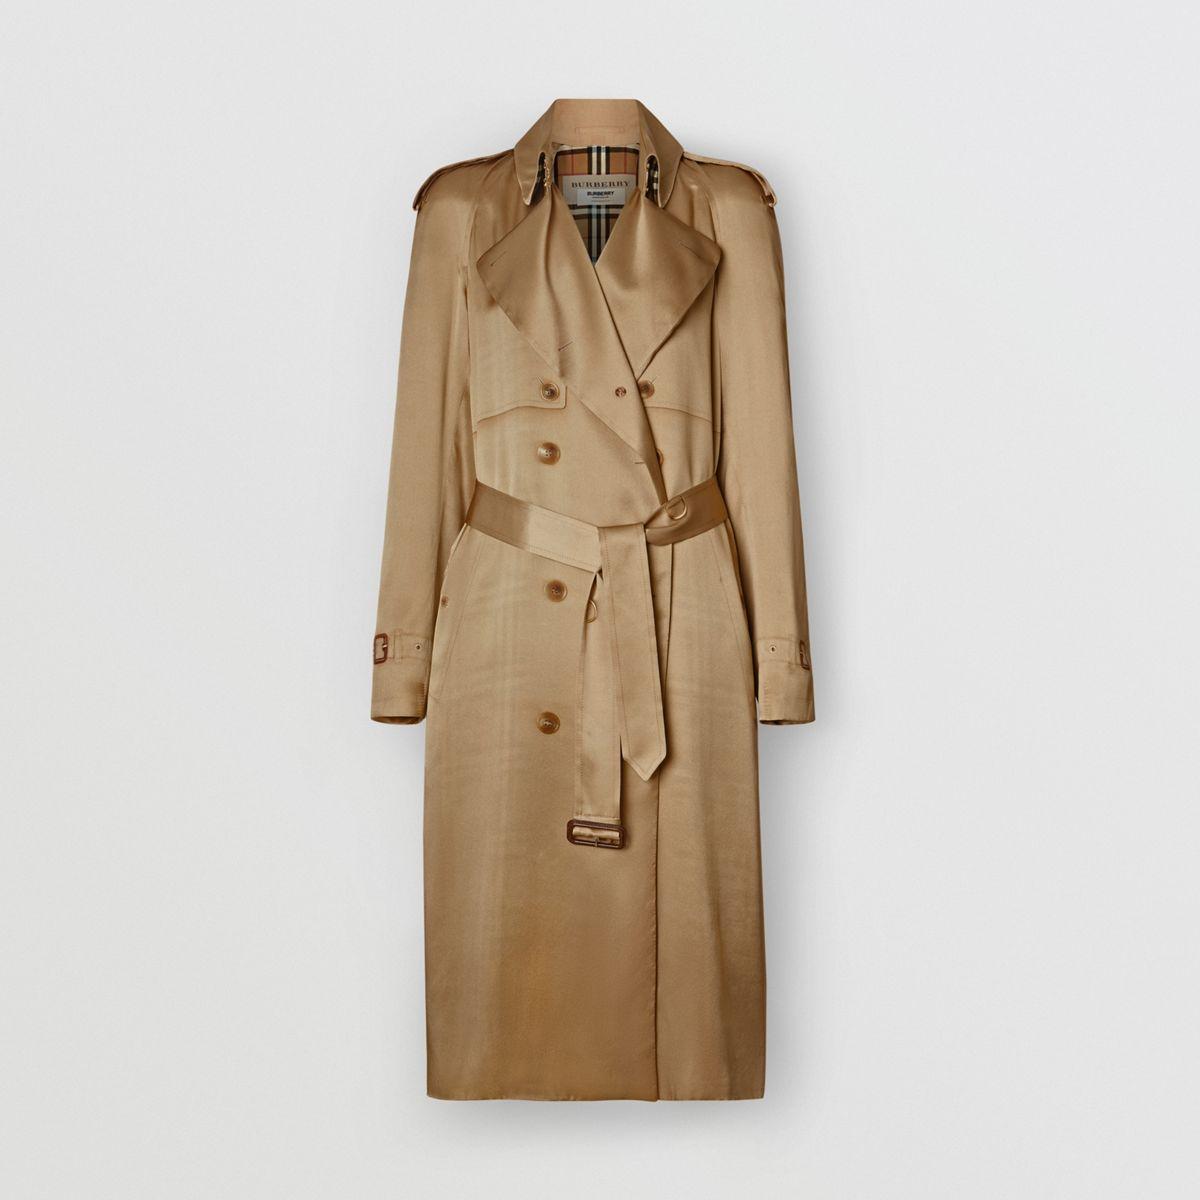 Burberry Silk Satin Dressed Trench Coat in Honey (Natural) - Lyst